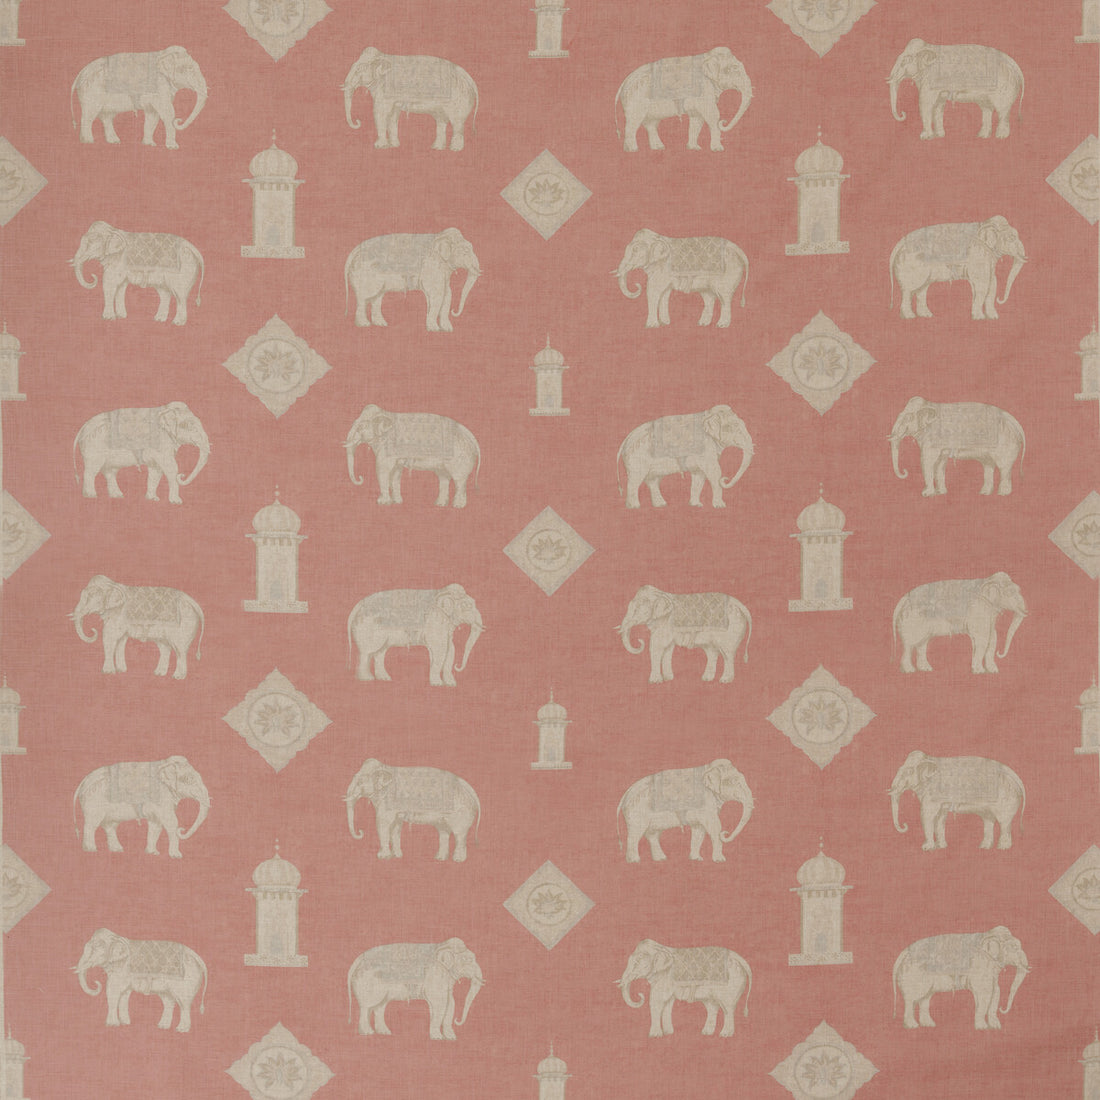 Bolo fabric in pink color - pattern AM100316.17.0 - by Kravet Couture in the Andrew Martin Gobi collection